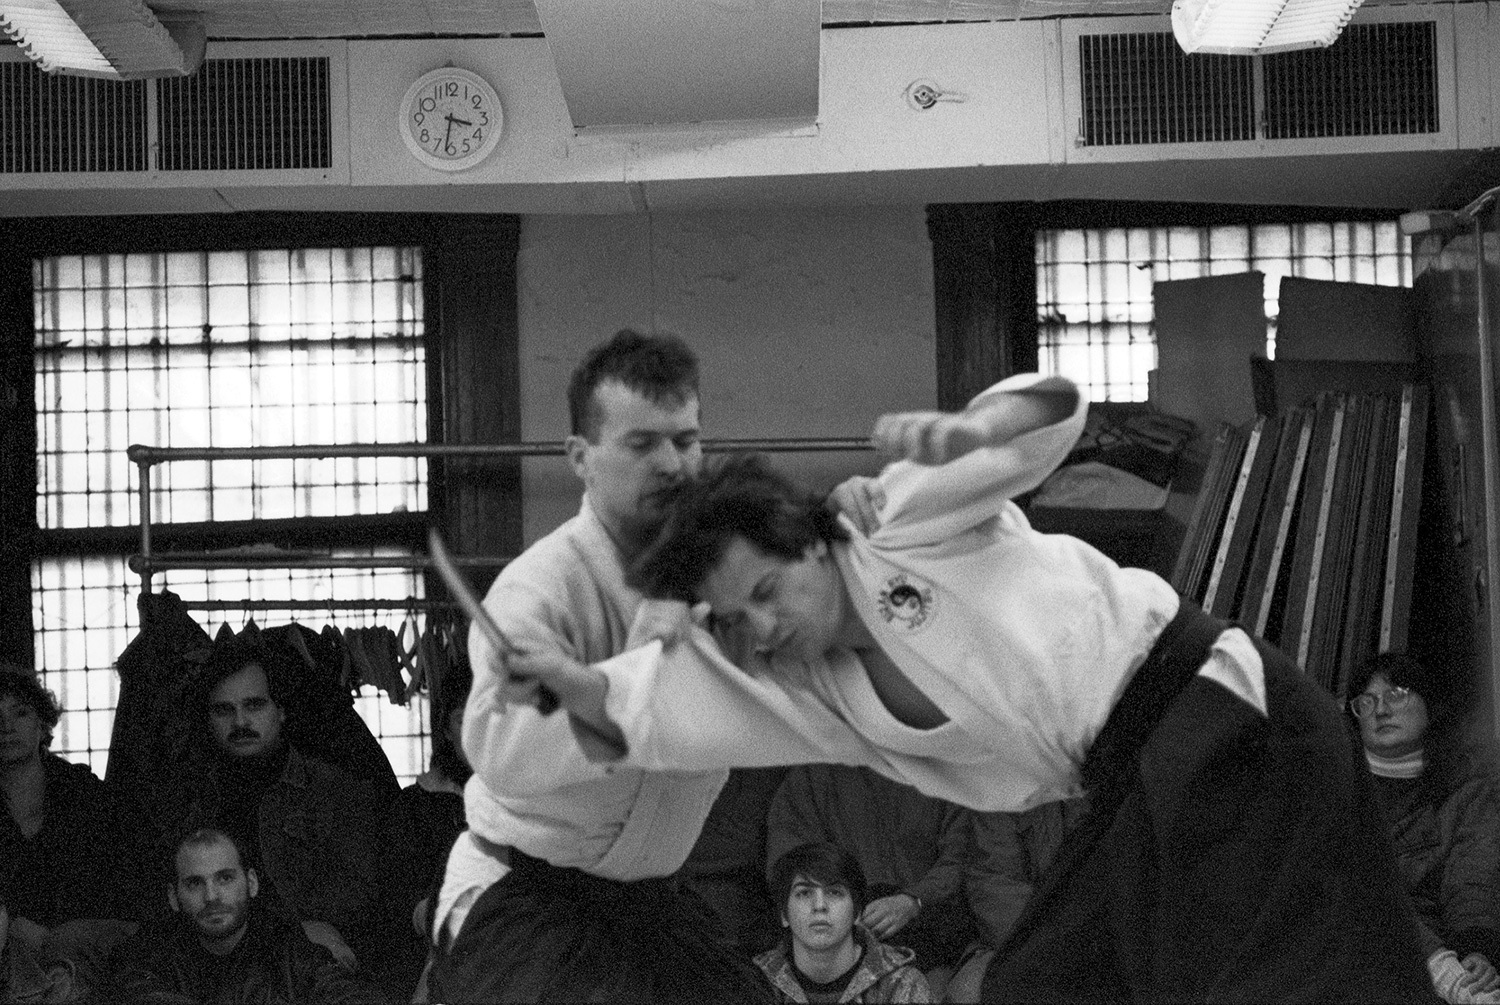  That’s Ivan Guerra on the left; these are outtakes from his black belt test at the Eizan Ryu Ju-jitsu school. It went on for hours. The school was founded uptown in the Carlito’s Way era; Japanese in lineage, Filipino by instruction, Puerto Rican by